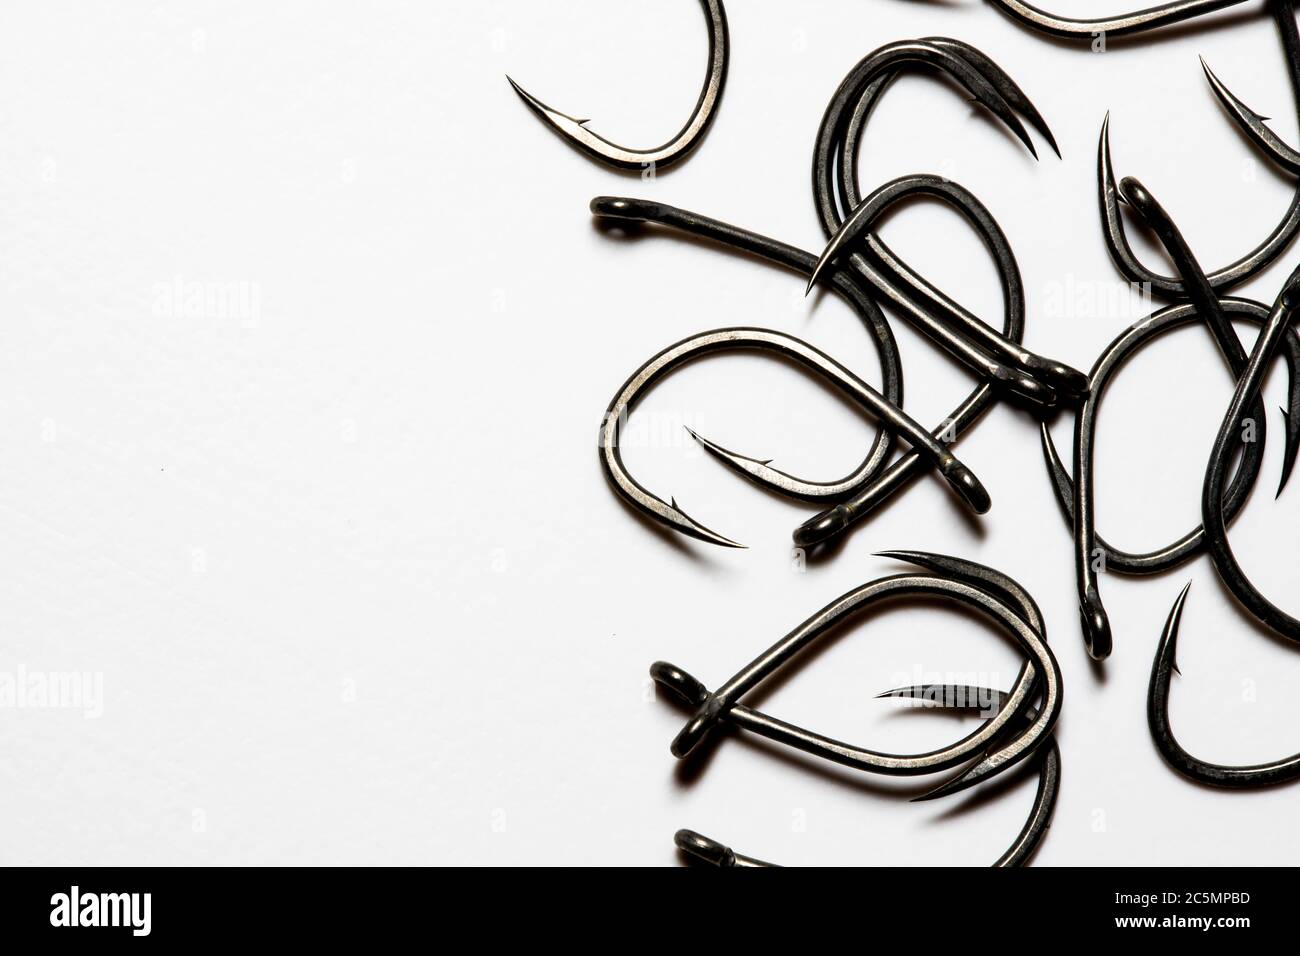 Large barbed fishing hooks on a white background with copy space Stock Photo